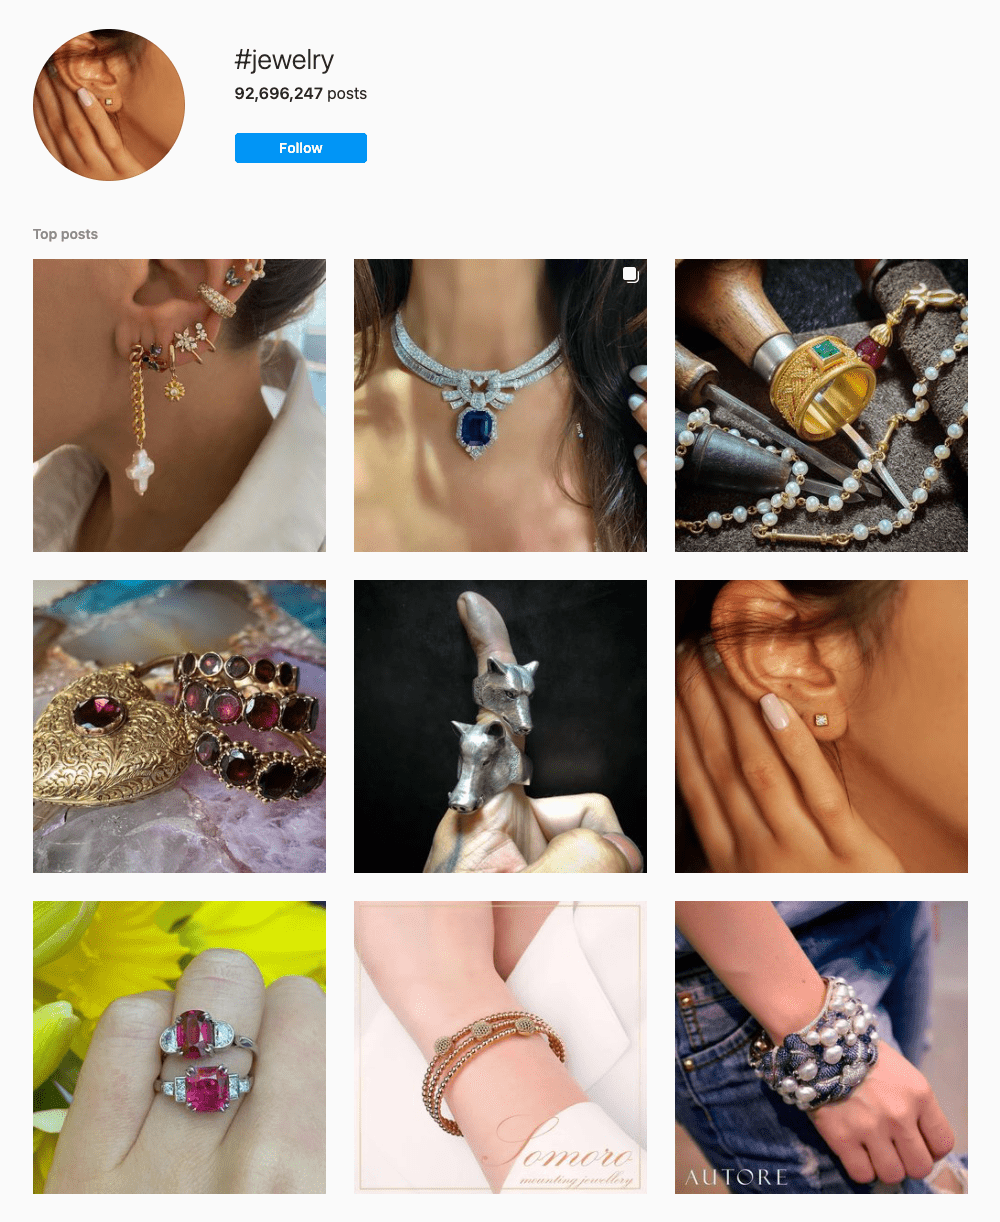 #jewelry Hashtags for Instagram